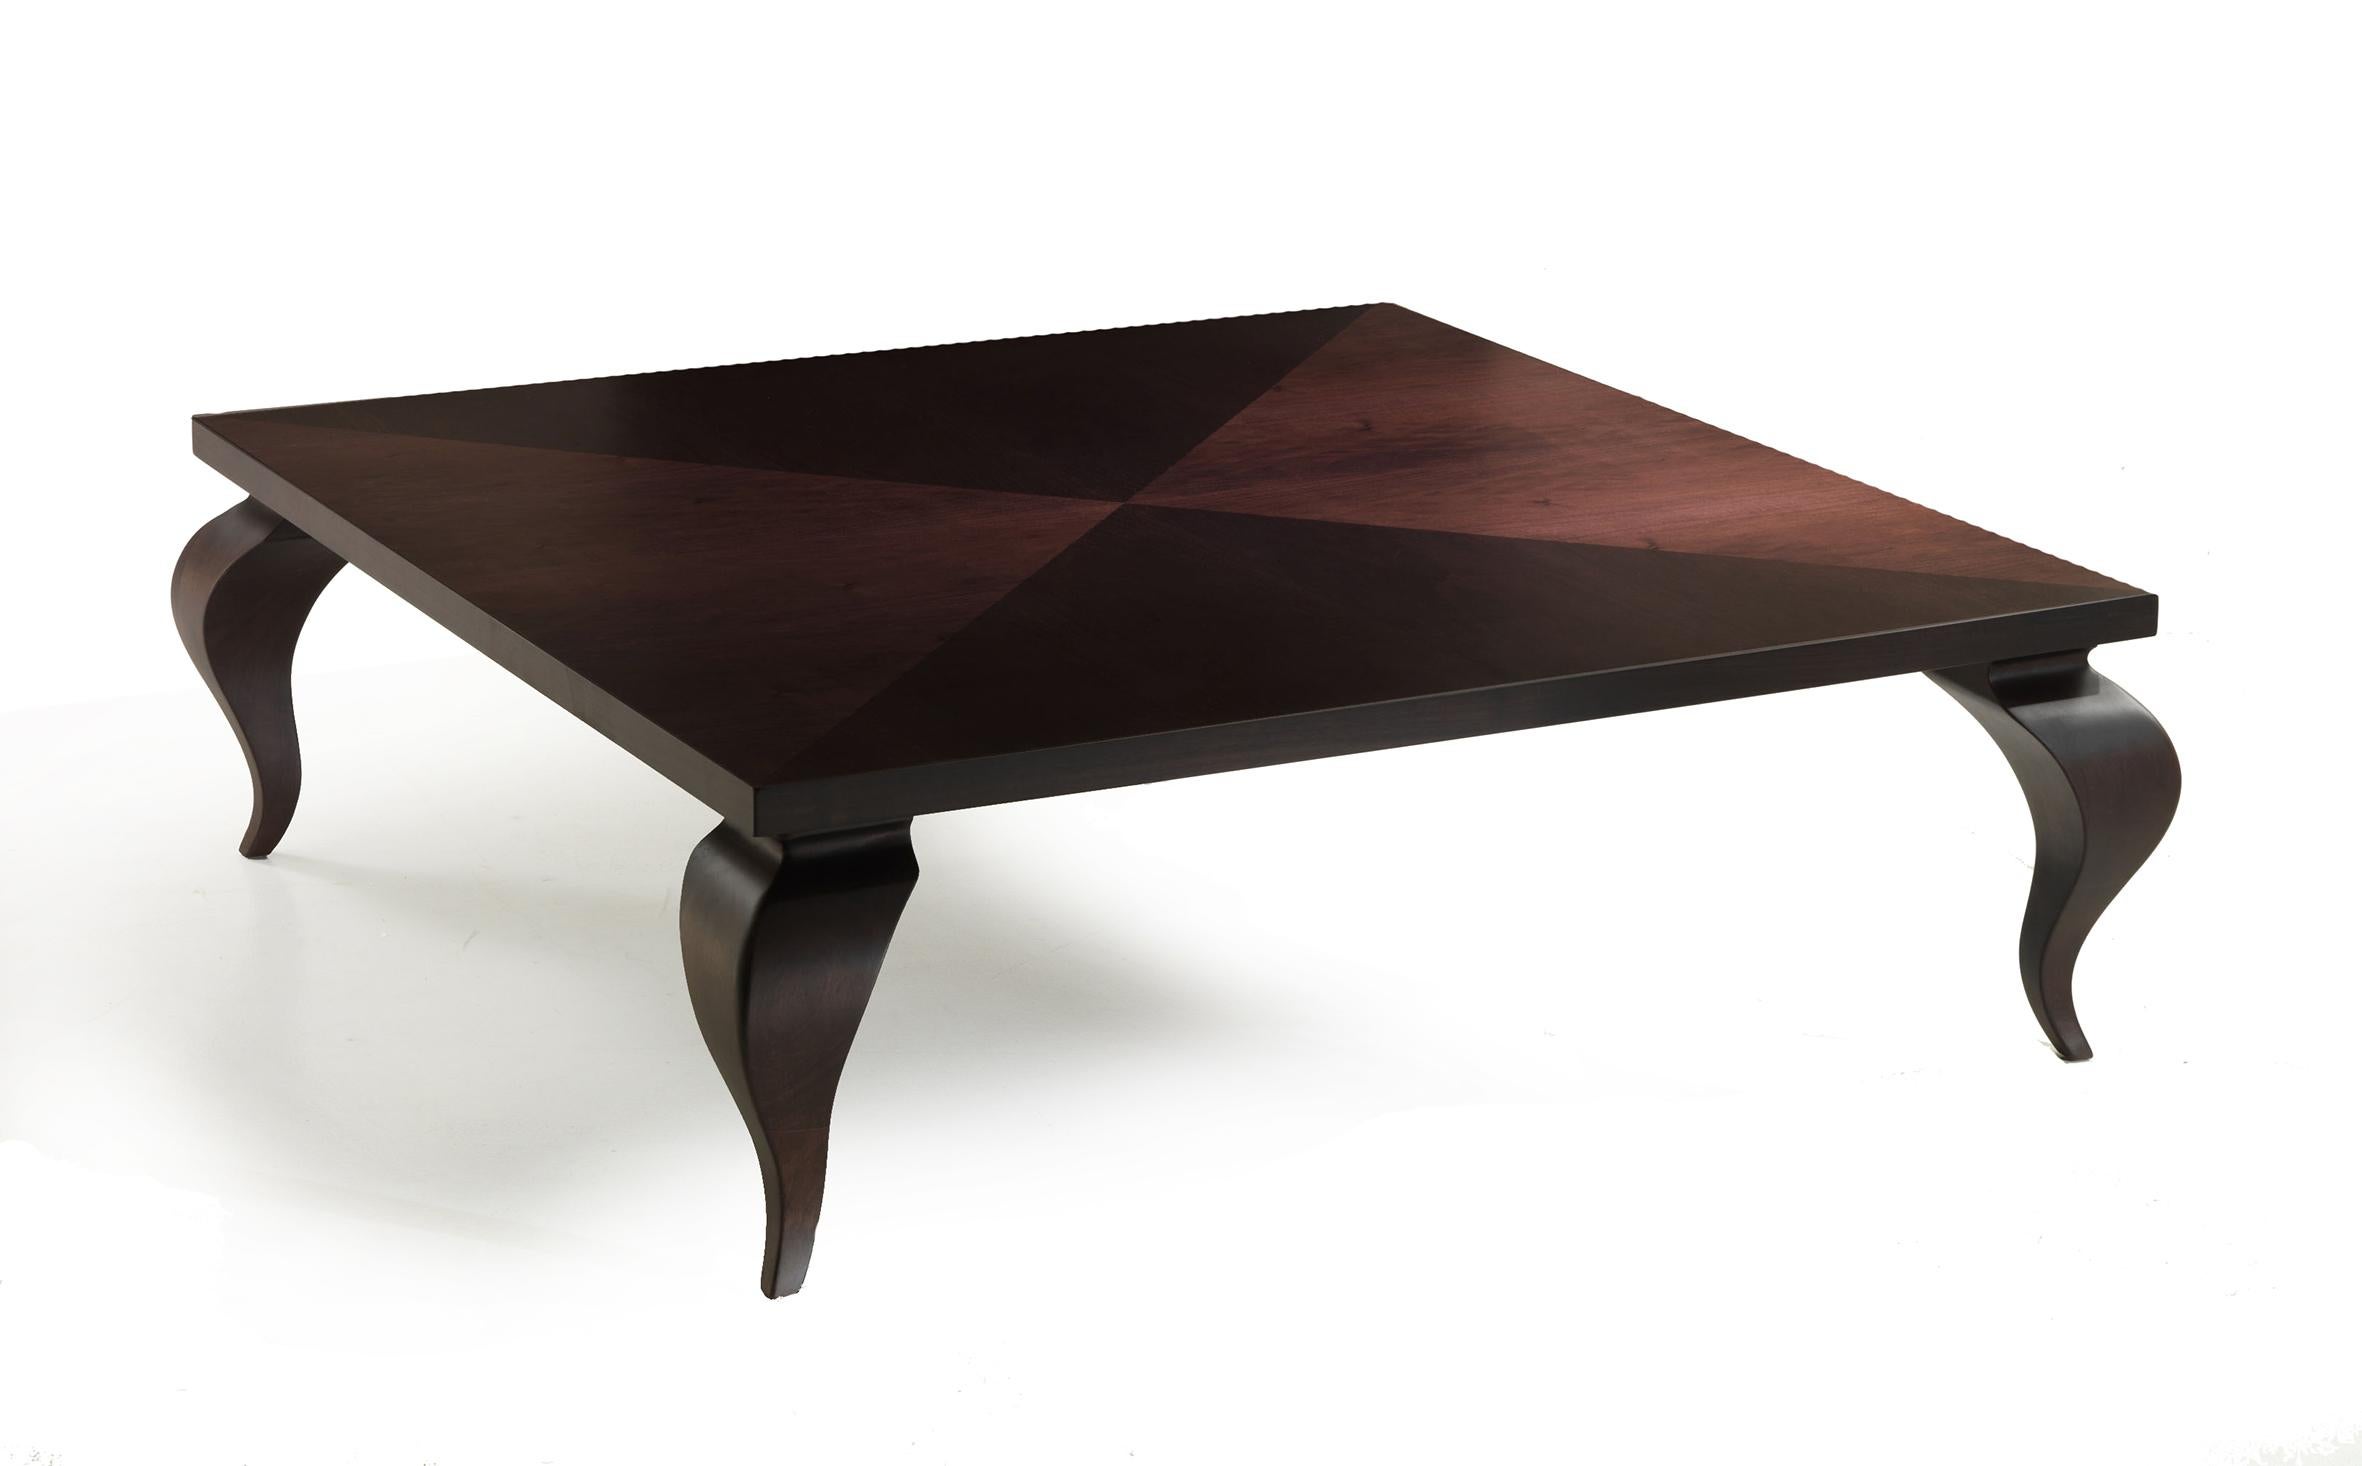 Introducing the Duon-ino cocktail table, a masterpiece of design envisioned by the talented Aldo Cibic. This handcrafted Italian creation is a celebration of contrasts, where a large square surface with angular precision meets the exotic allure of